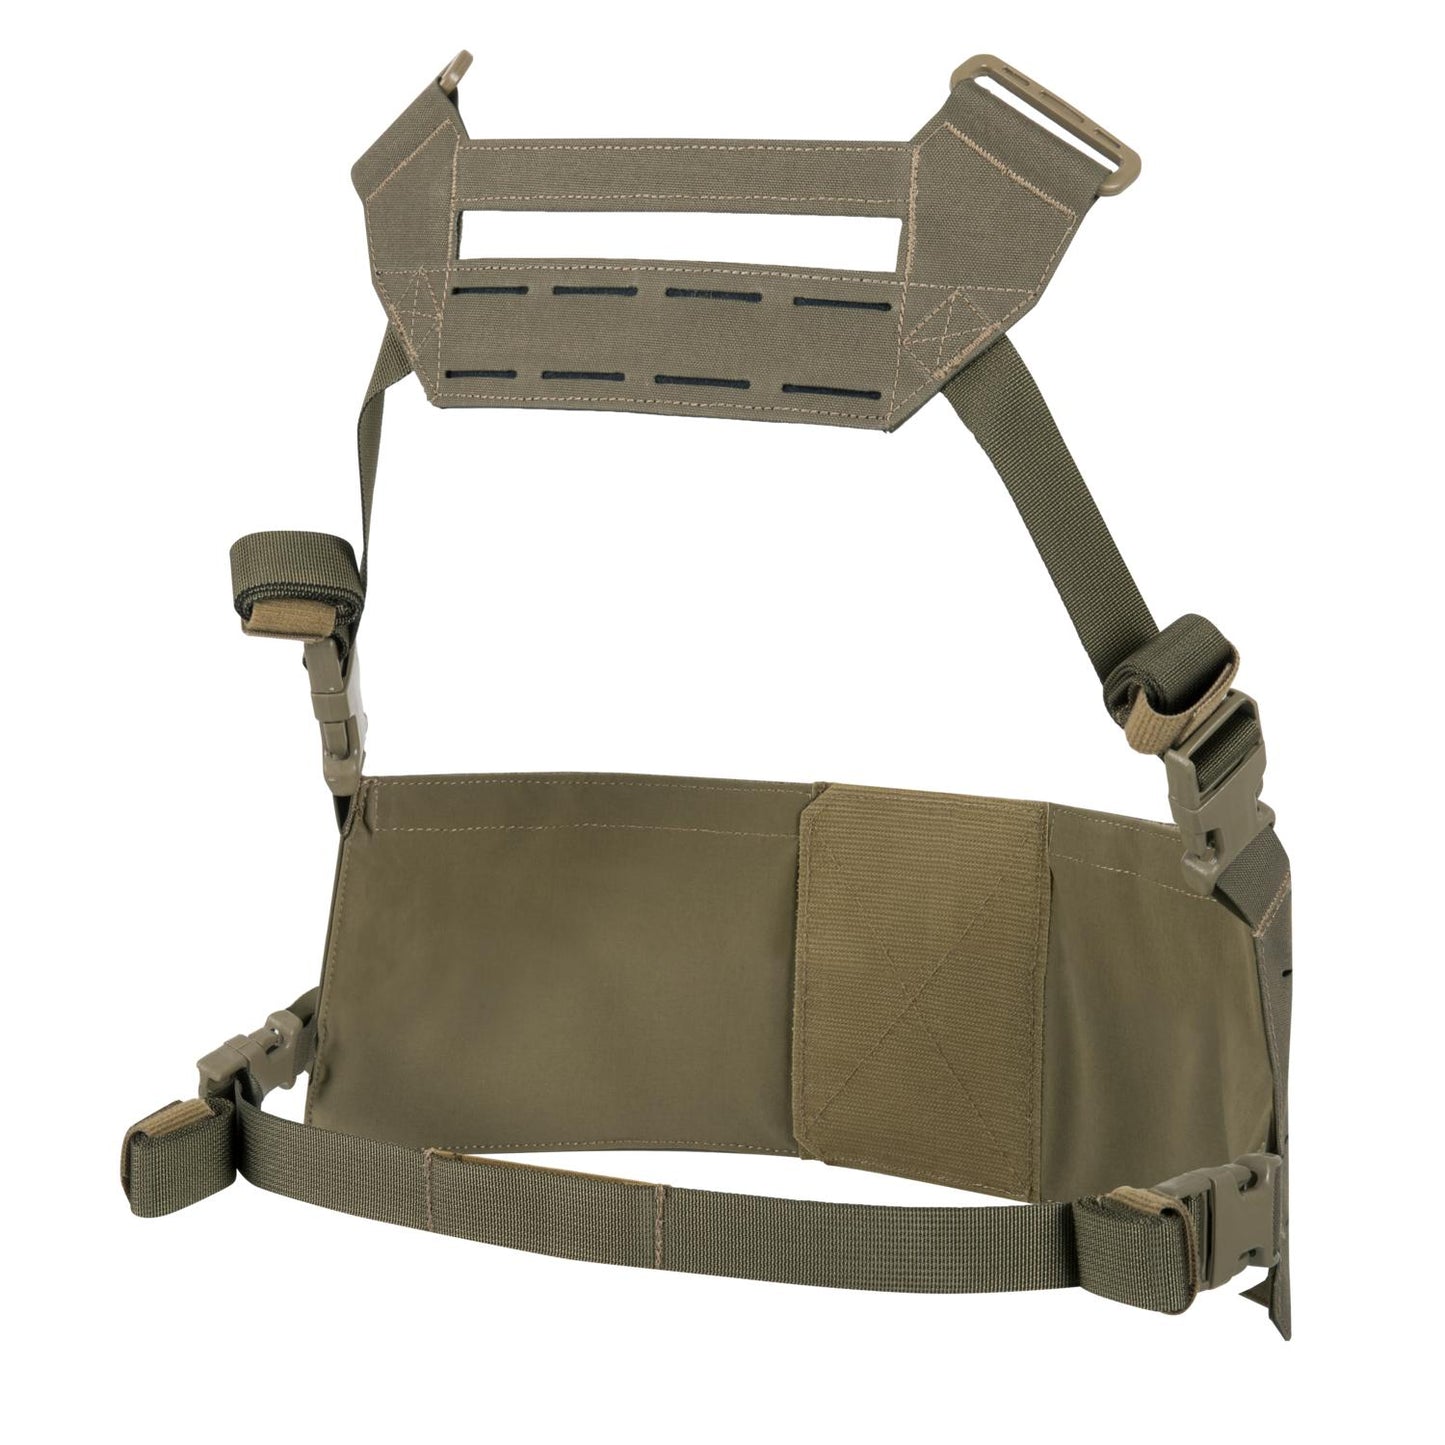 DIRECT ACTION SPITFIRE MK II CHEST RIG INTERFACE